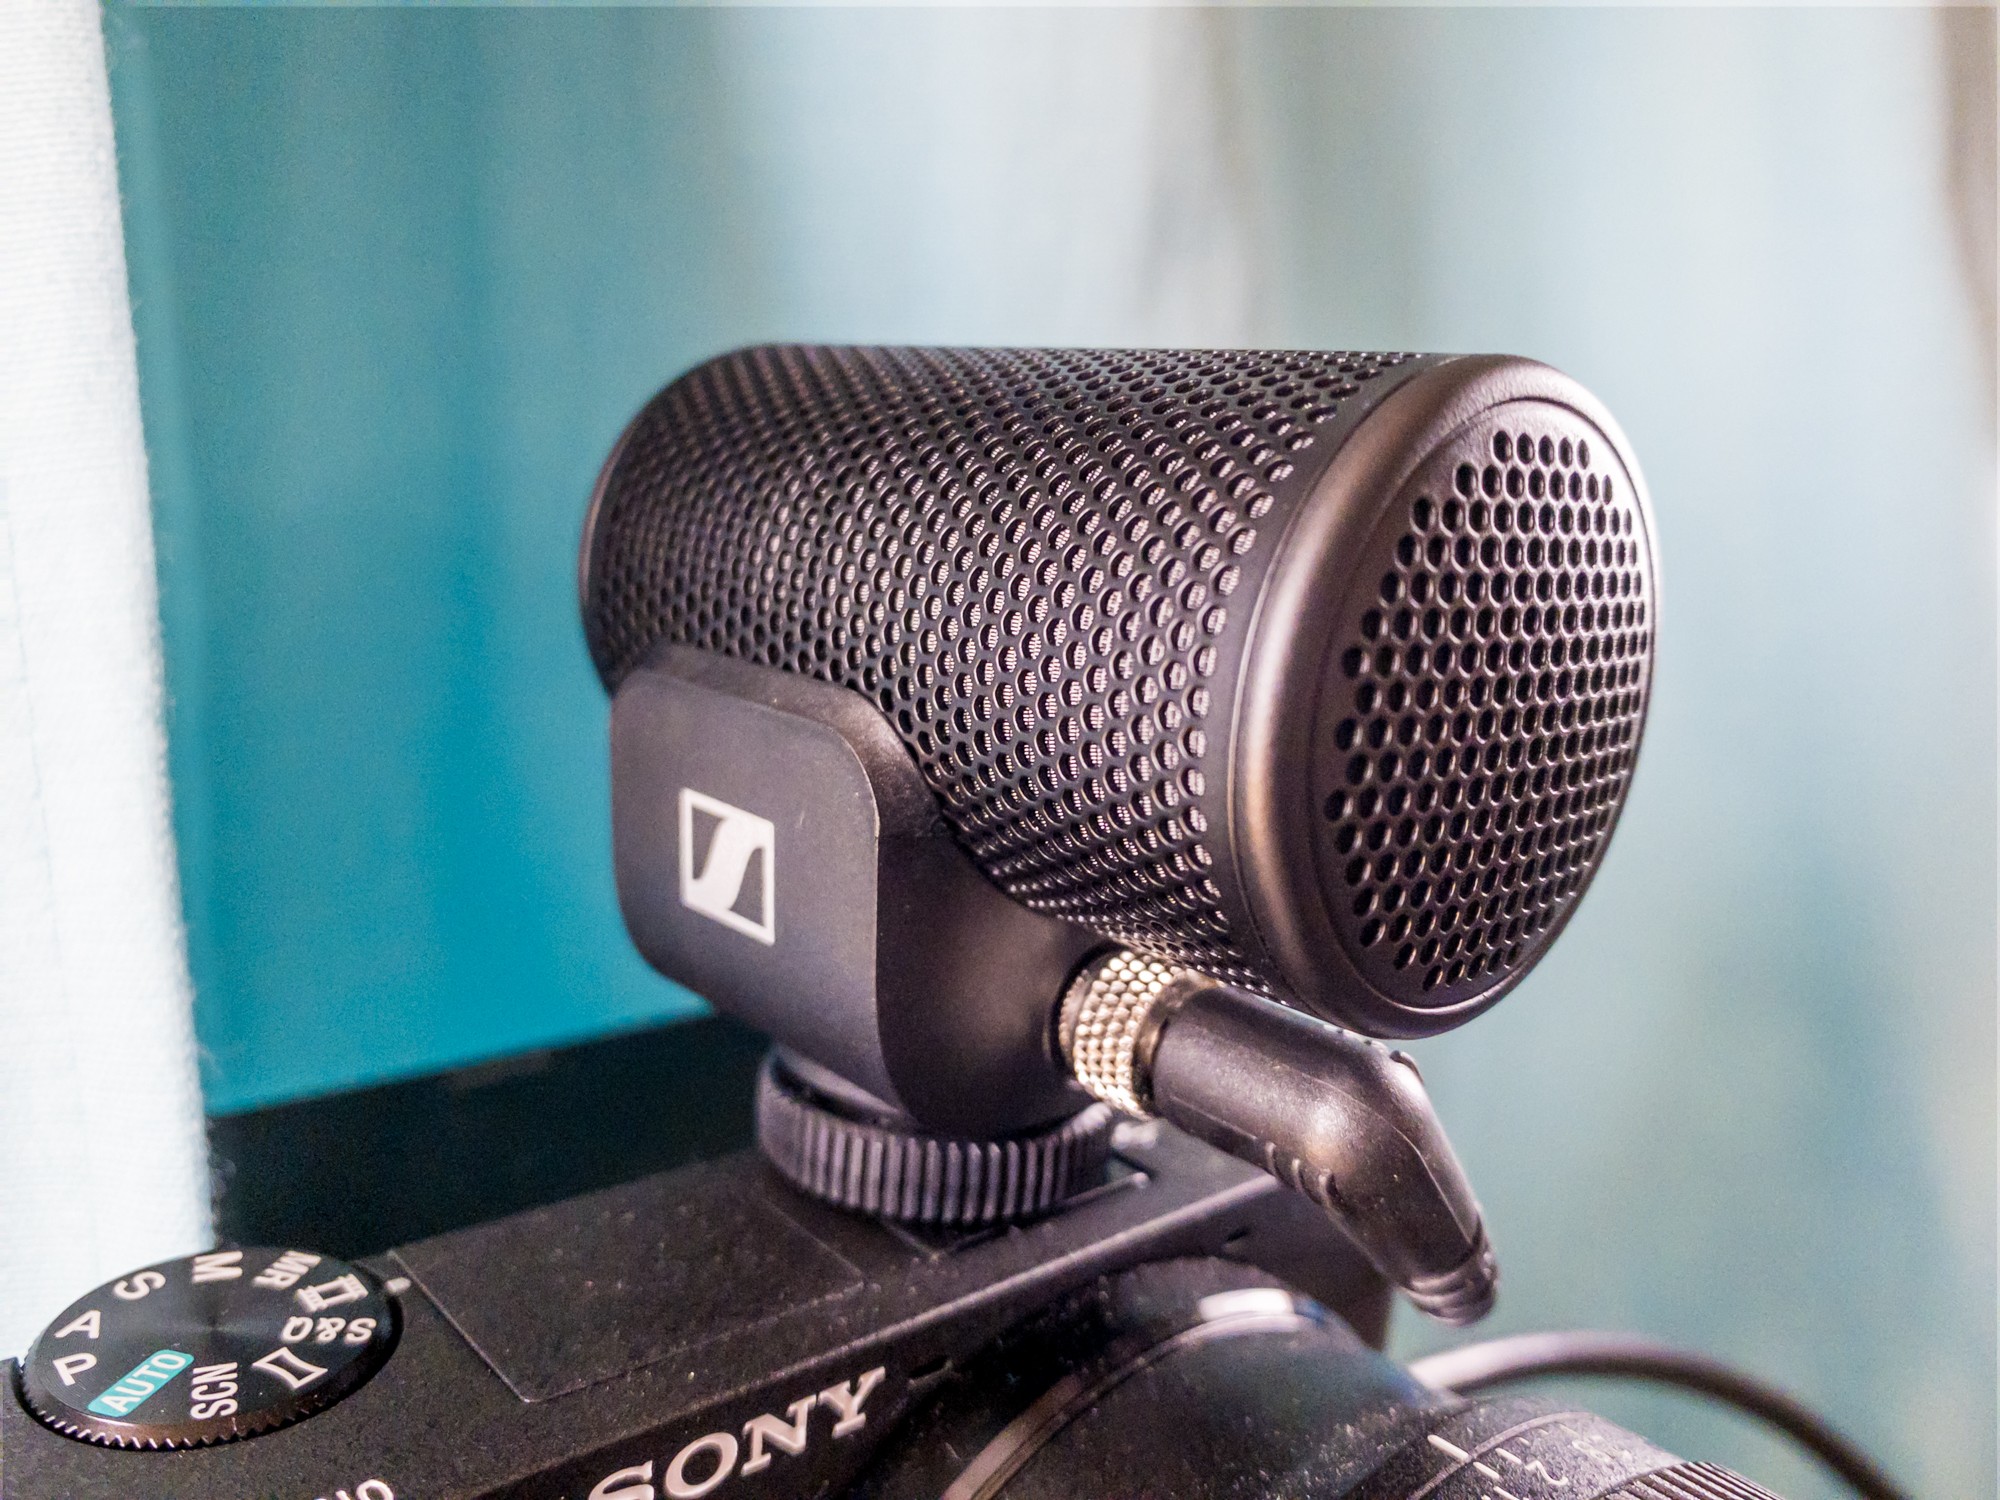 Sennheiser’s MKE 200 on-camera microphone is the perfect home videoconferencing upgrade